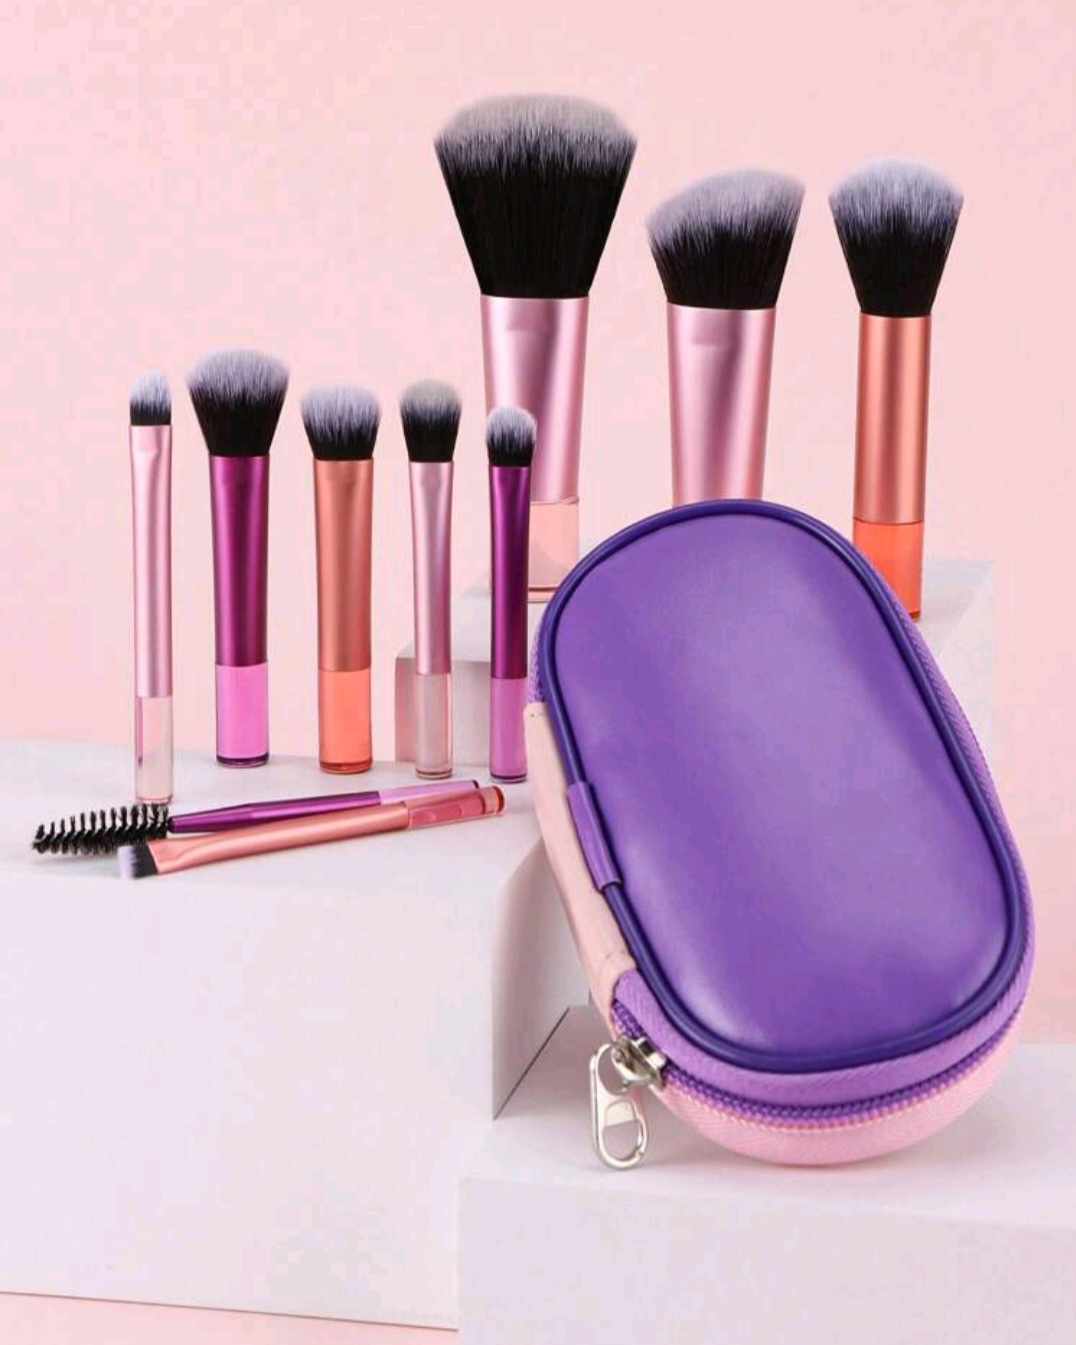 New Arrival 10pcs Mini Makeup Brushes Set With Bag, Including Powder Brush And Eyeshadow Brushes, Convenient For Travel